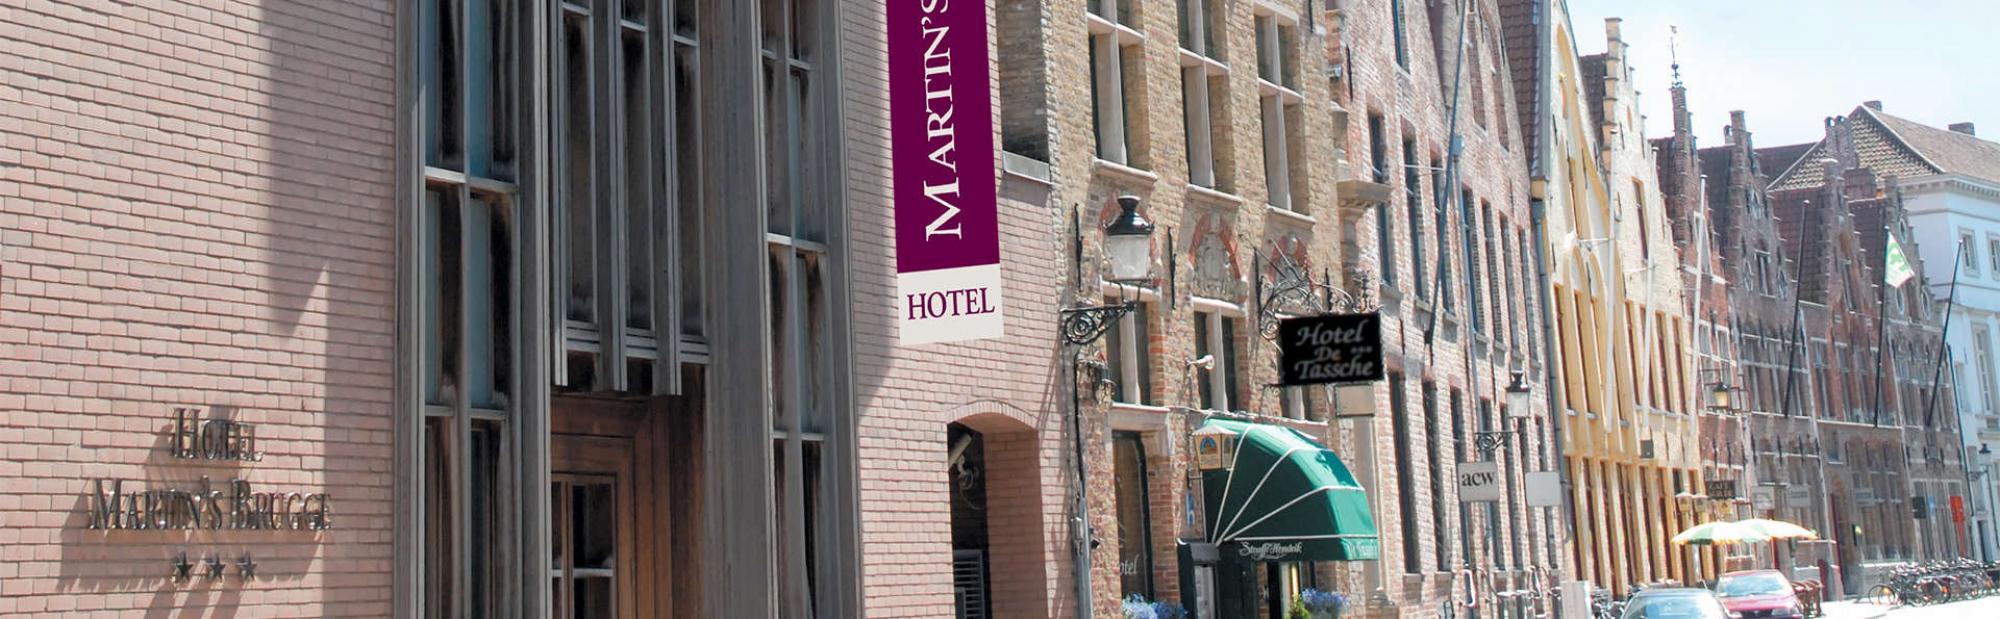 View Martins Brugge's beautiful hotel situated in impressive Bruges  Ypres.